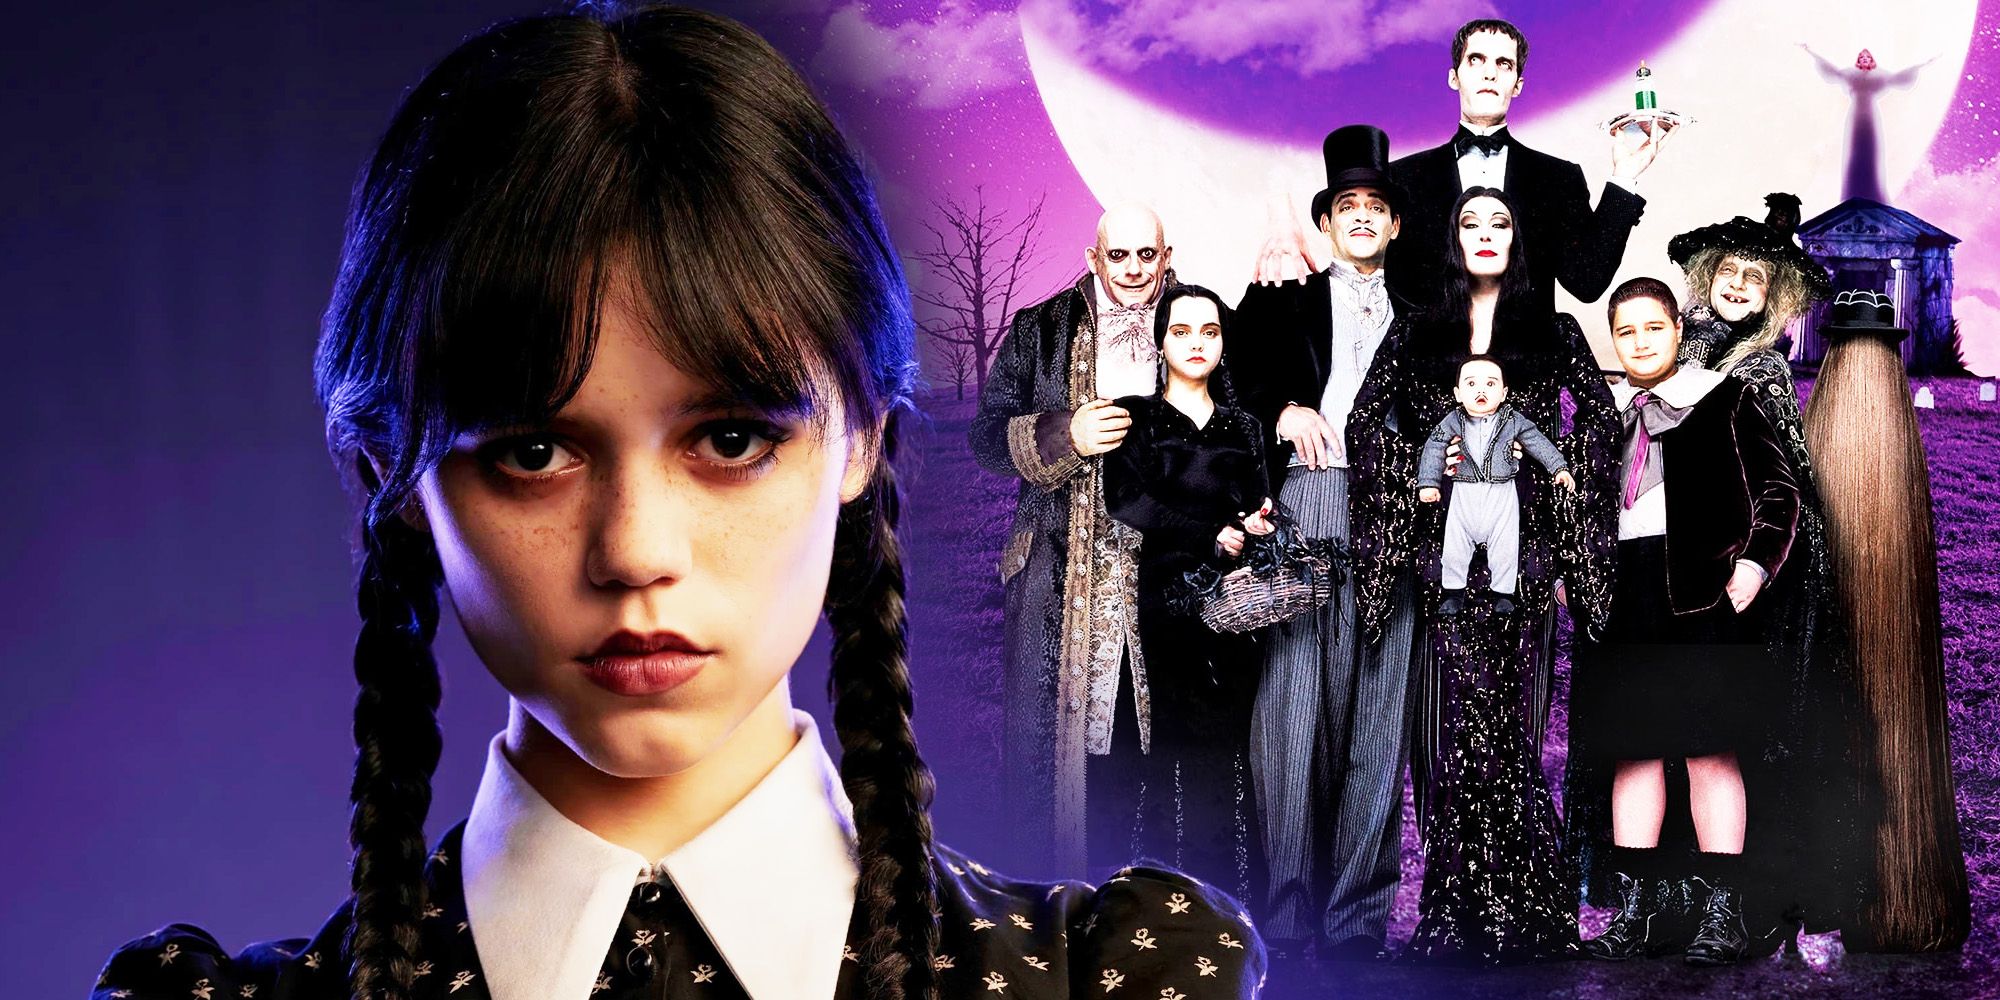 Wednesday' Season 2 Could Feature More of the Addams Family